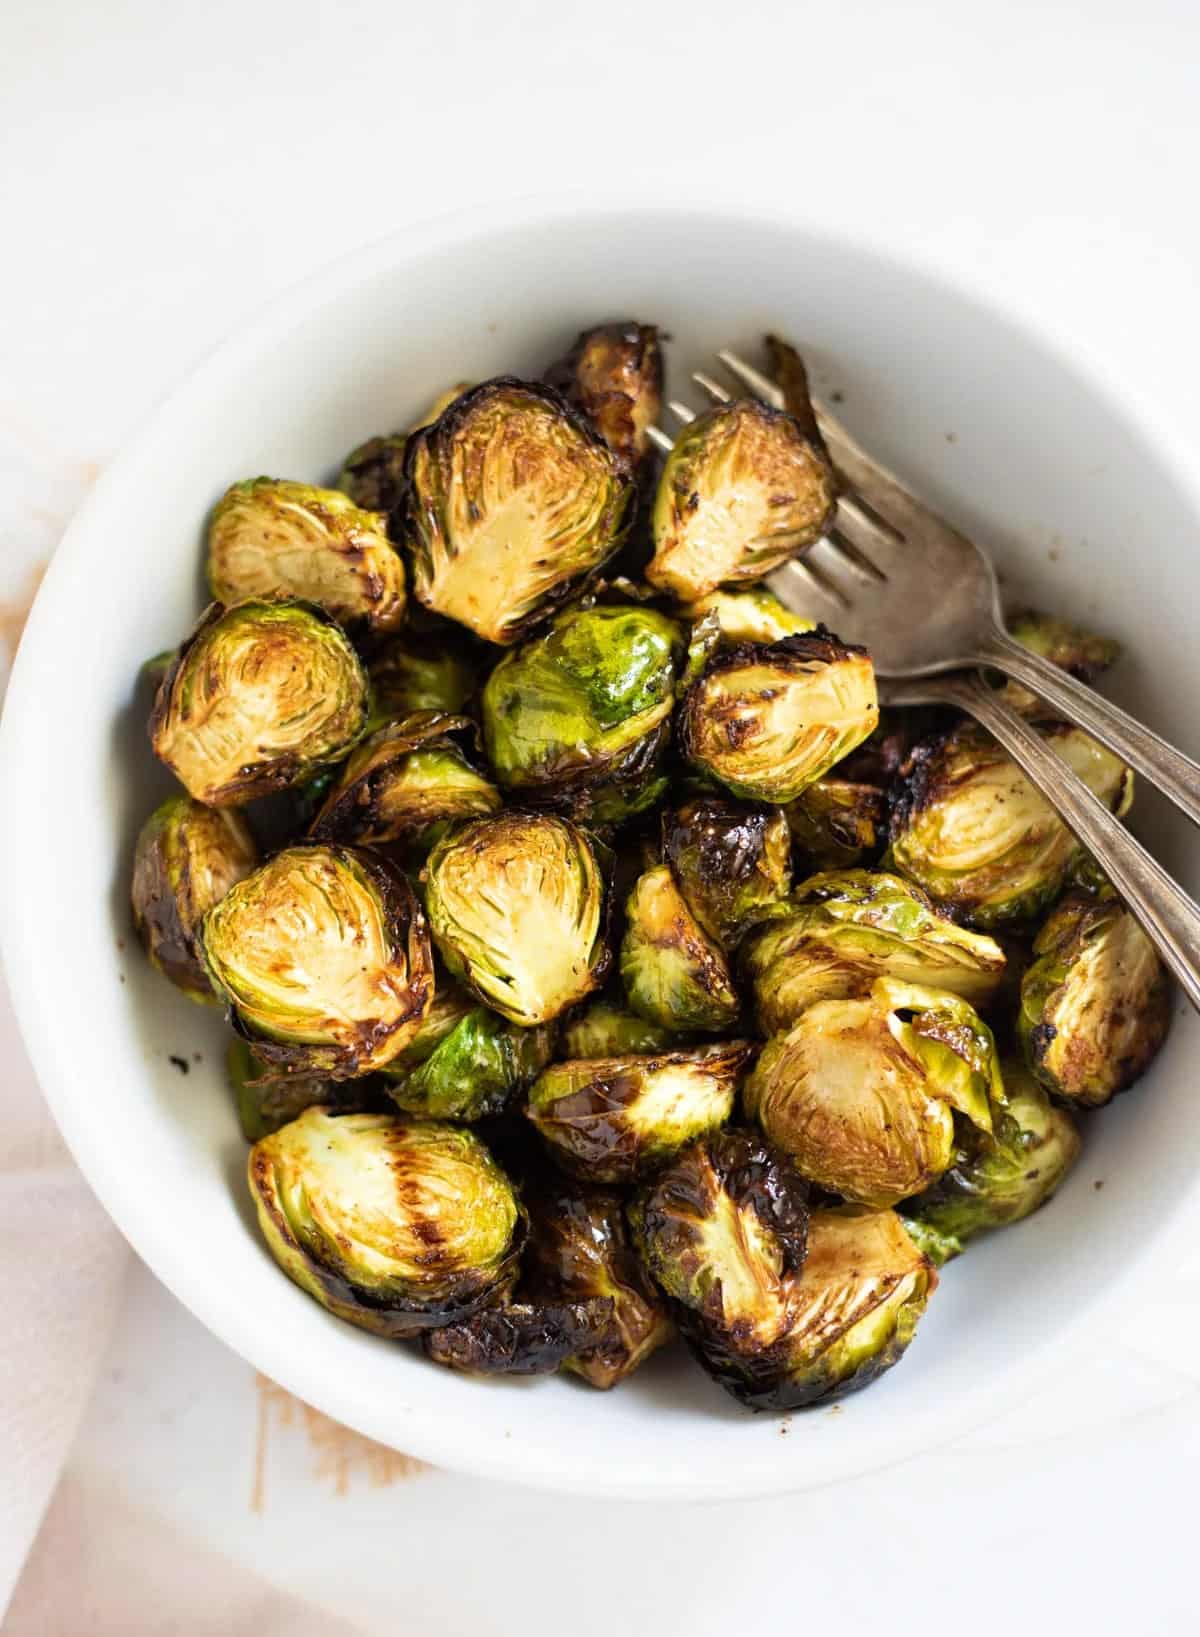 Crispy air fryer brussels sprouts